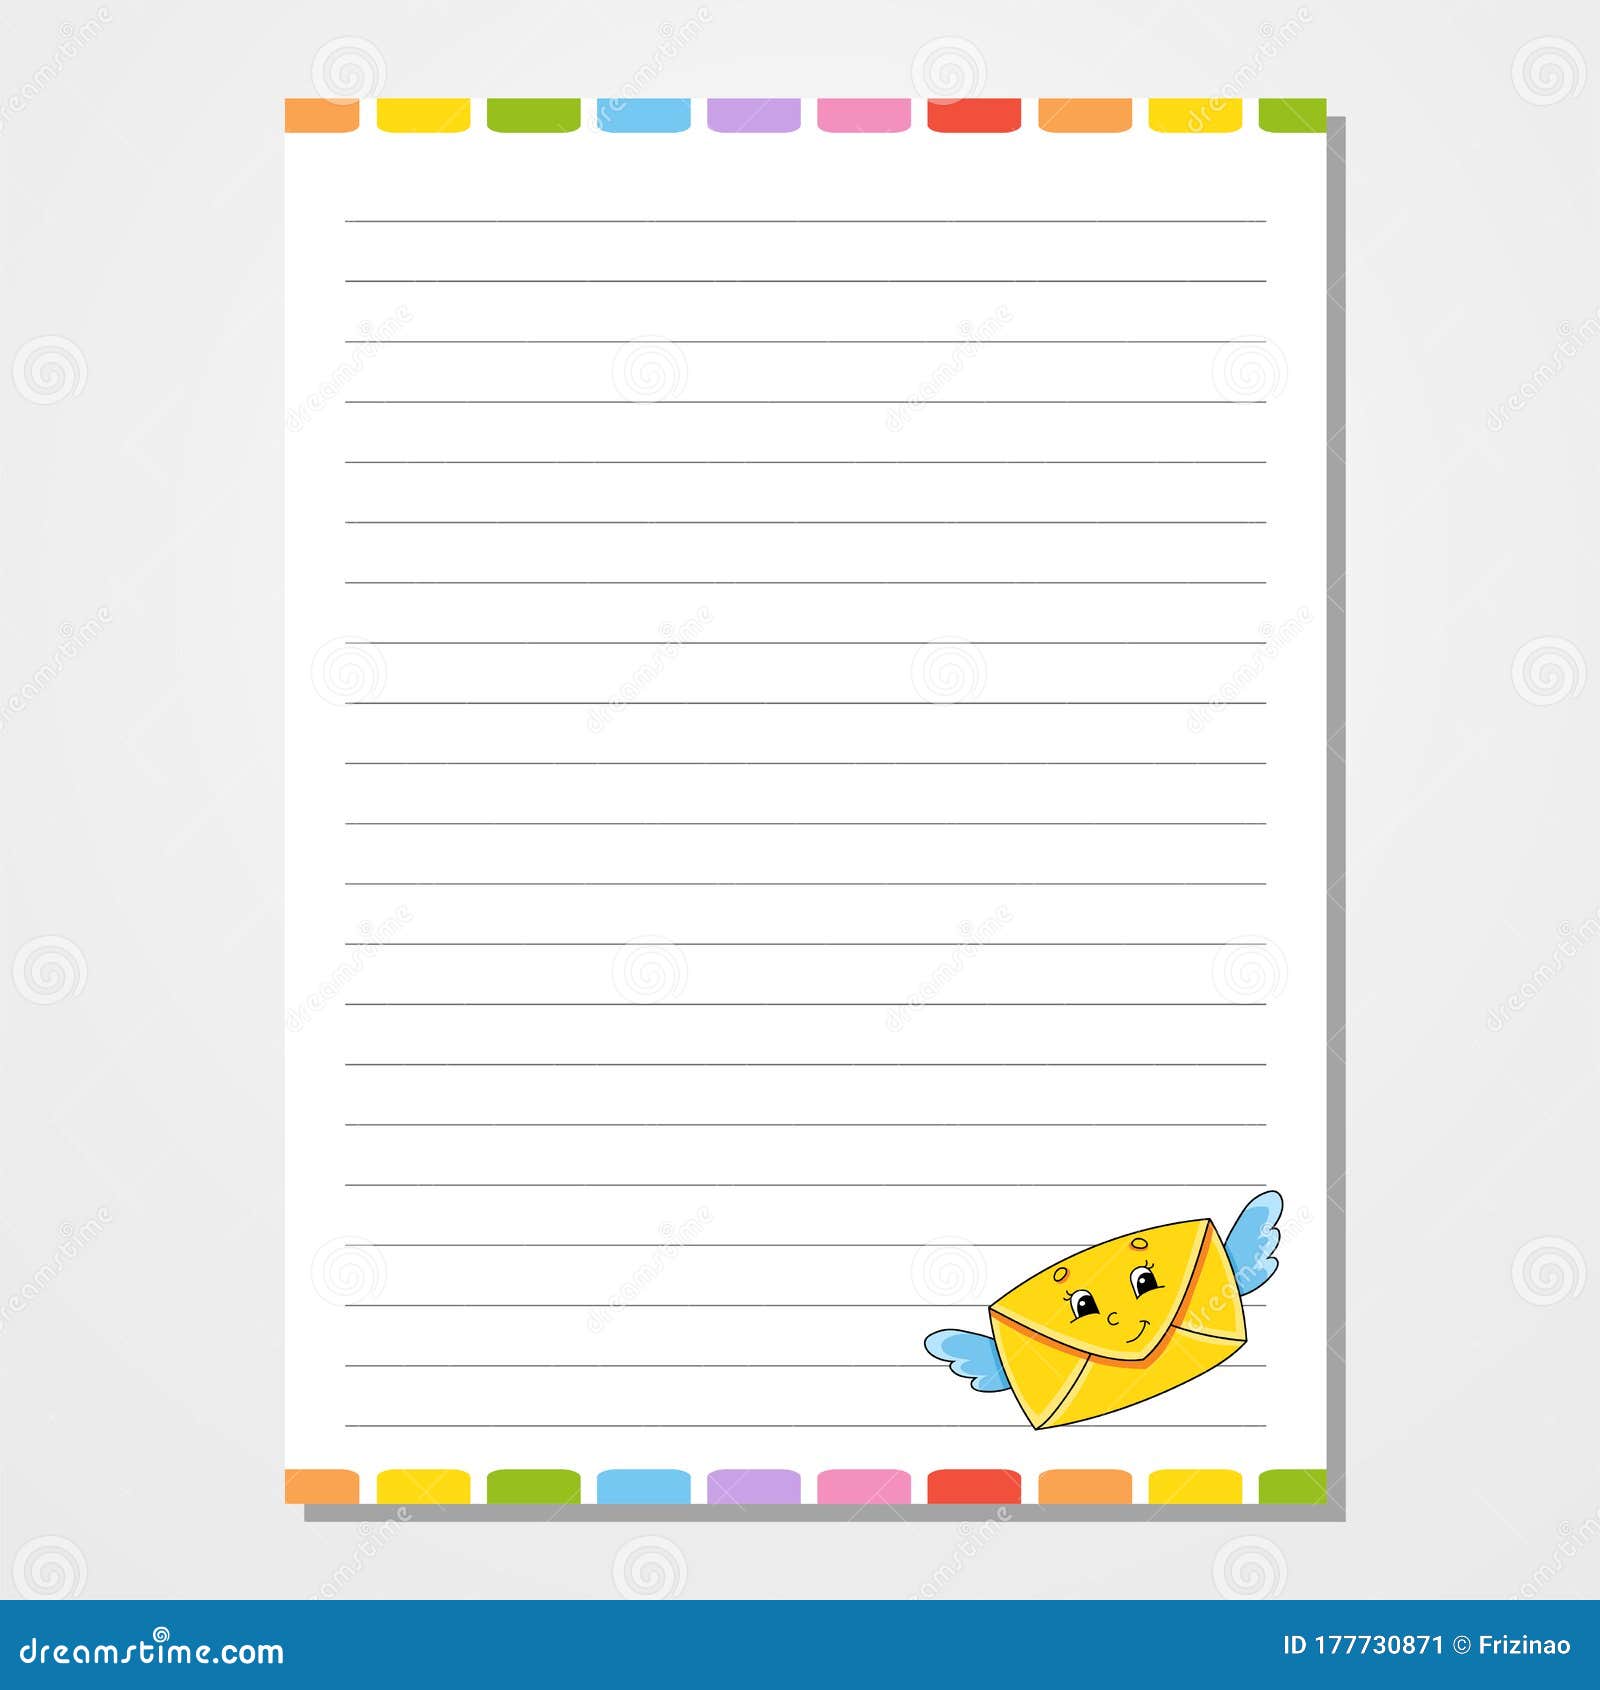 Sheet Template for Notebook, Notepad, Diary. Lined Paper. Cute